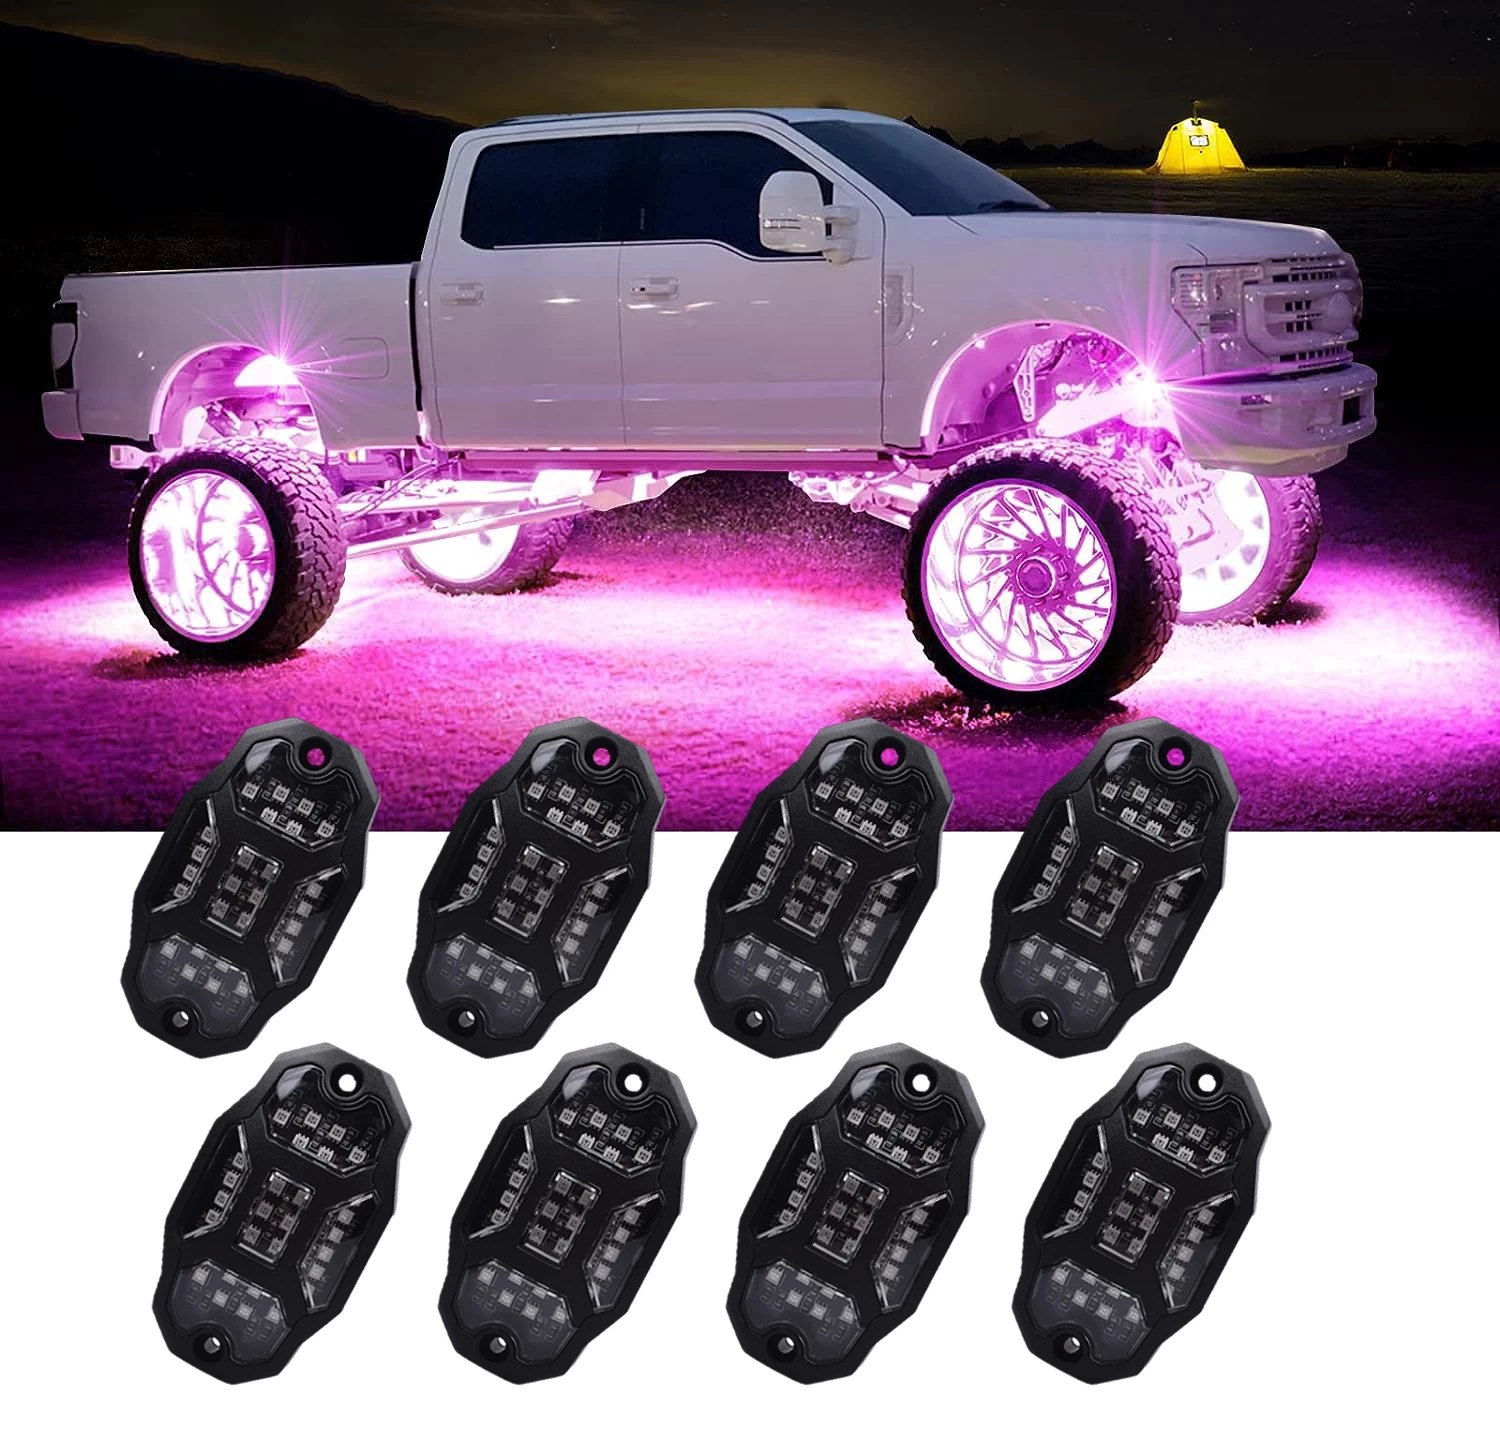 Cina Undergolw Light For Car Jeep Off-Road Truck Boat Bluetooth APP Control 4/6/8 In 1 RGB LED Rock Lights Chassis Light Music Sync - COPY - bav4w2 produttore